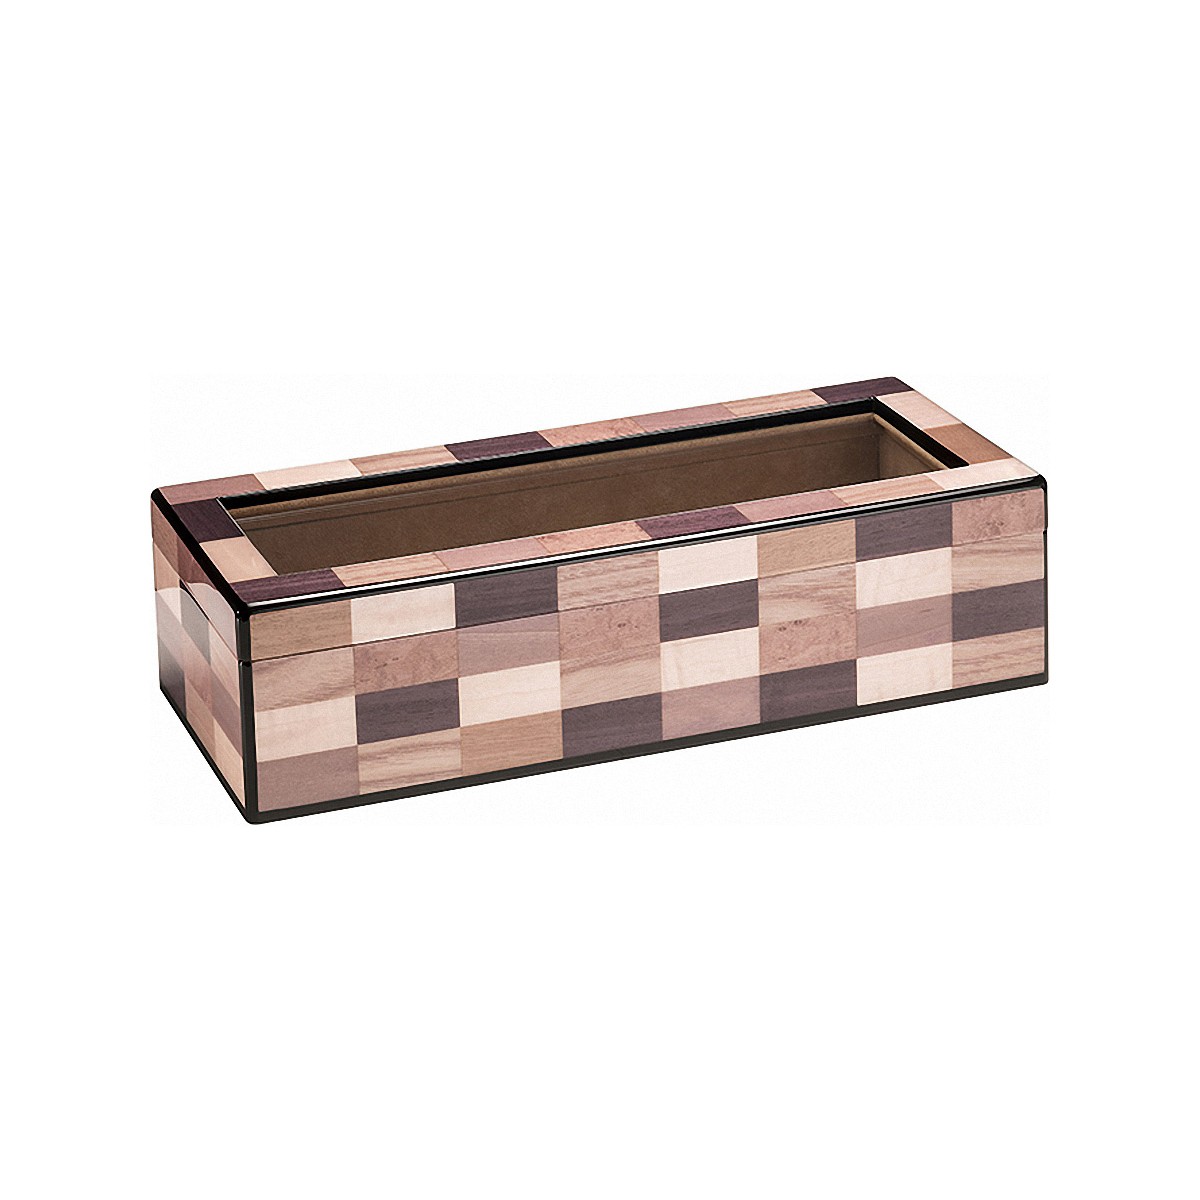 Morici - Sestiere Watch Case - Laquered wood - 6 seats